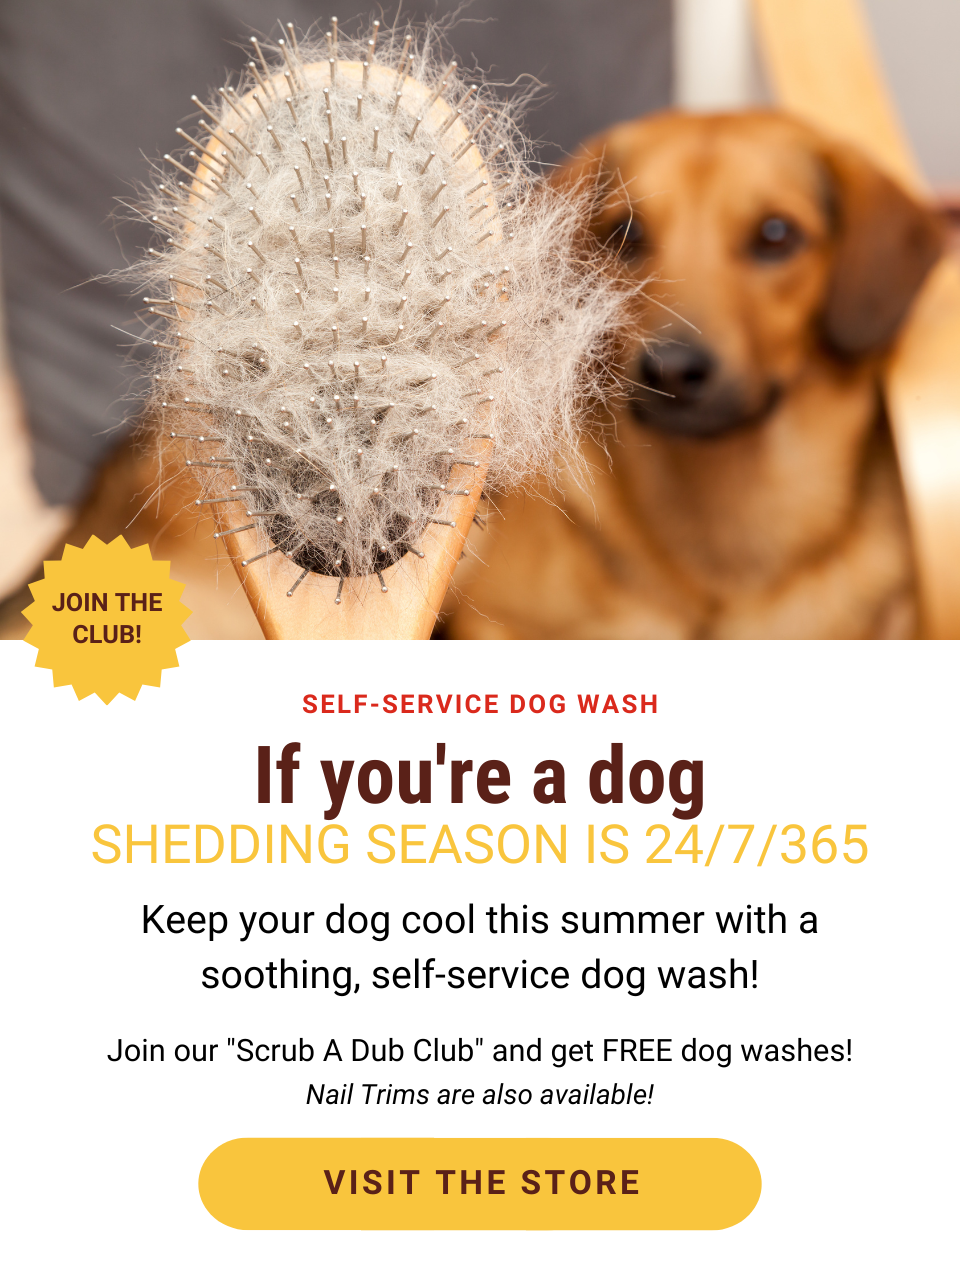 If you're a dog, shedding season s 24/7/365! Keep your dog cool this summer with a soothing, self-service dog wash!